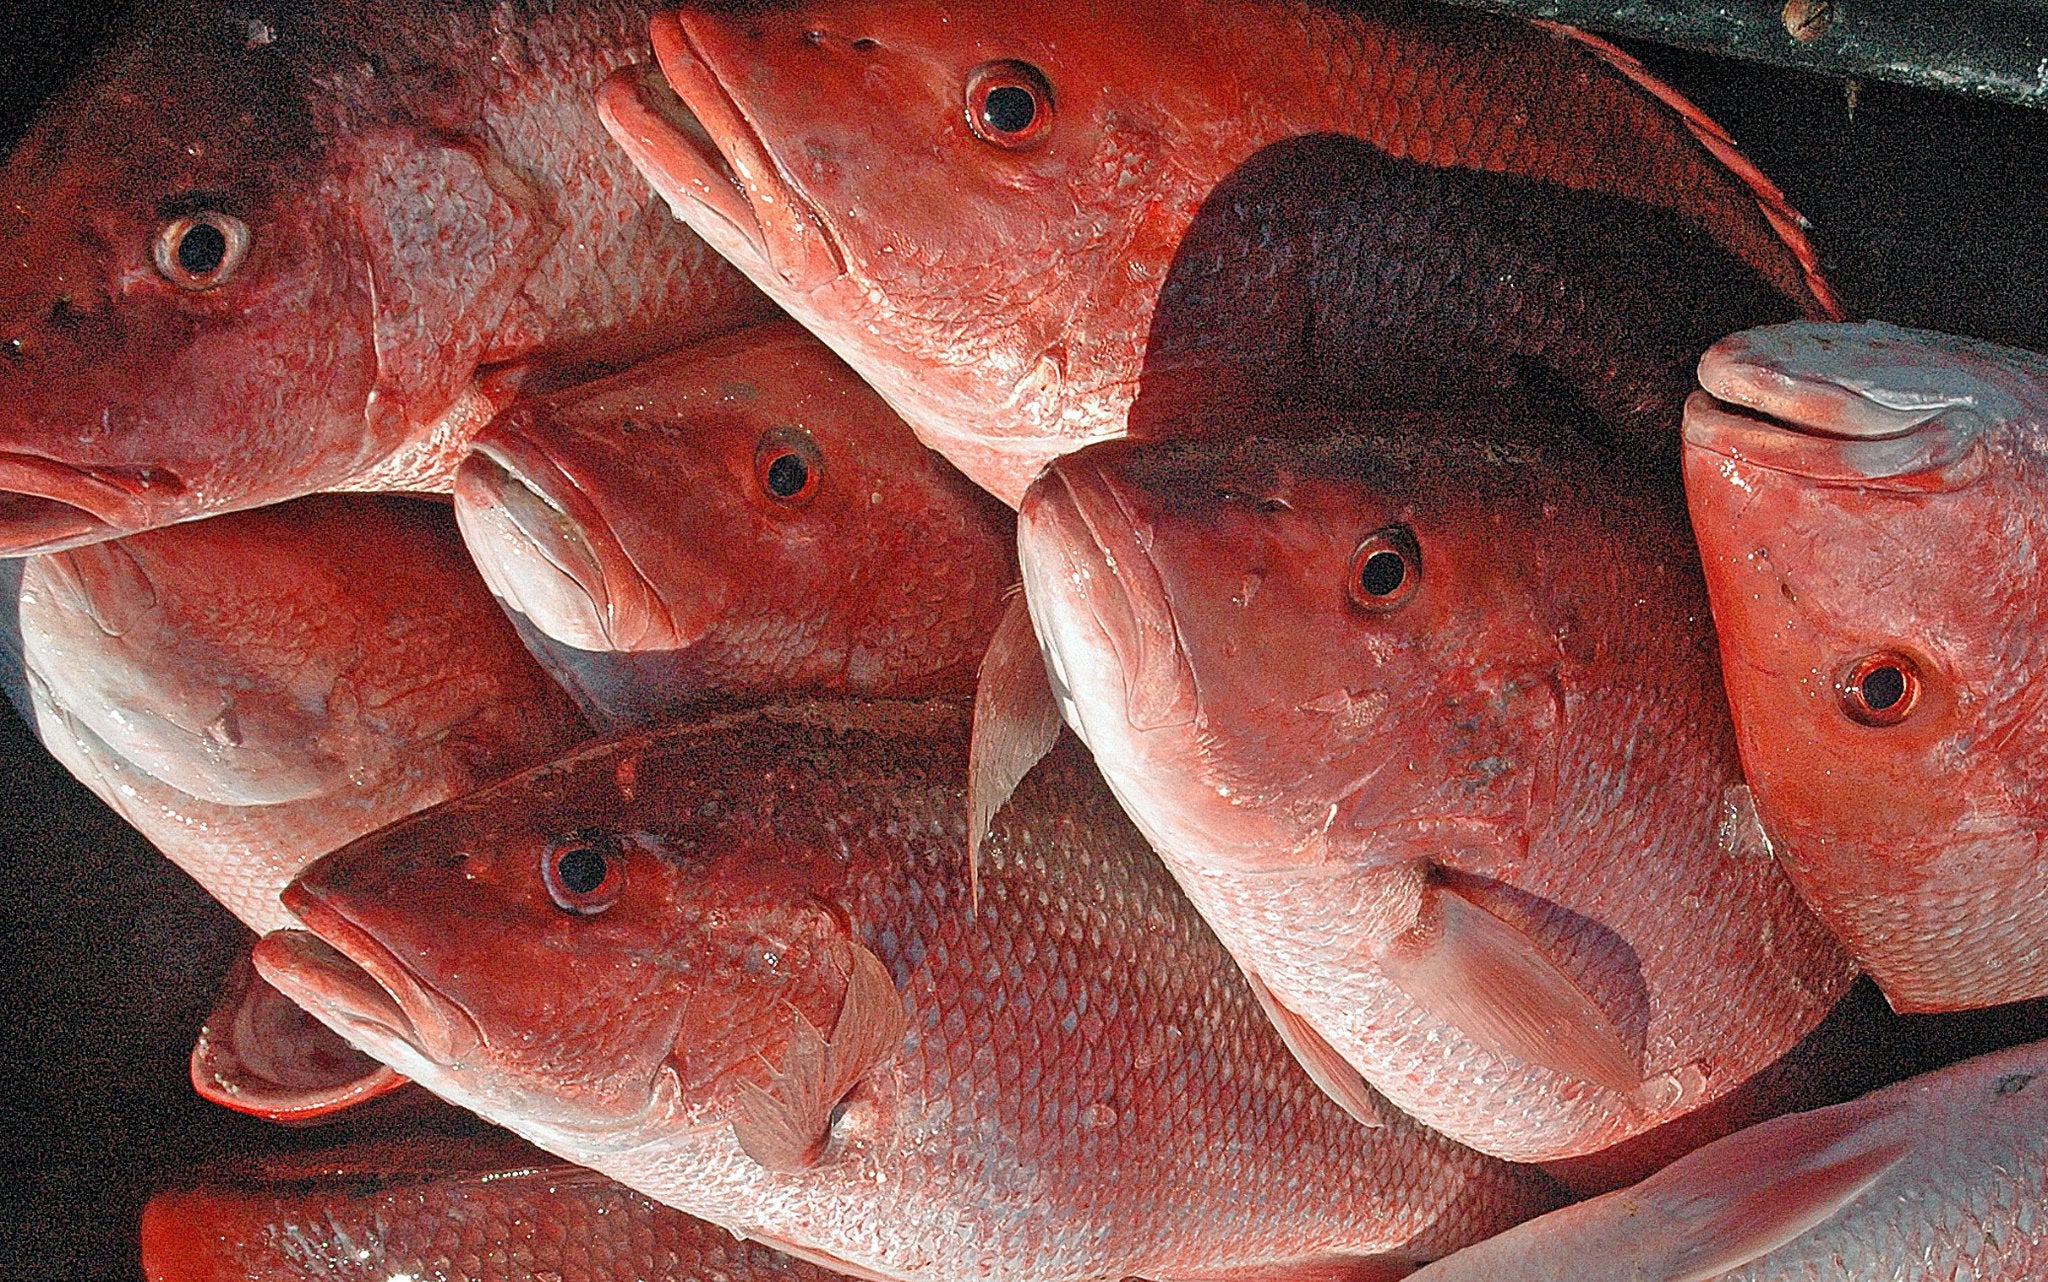 Red Snapper Season Closes Today, October 17